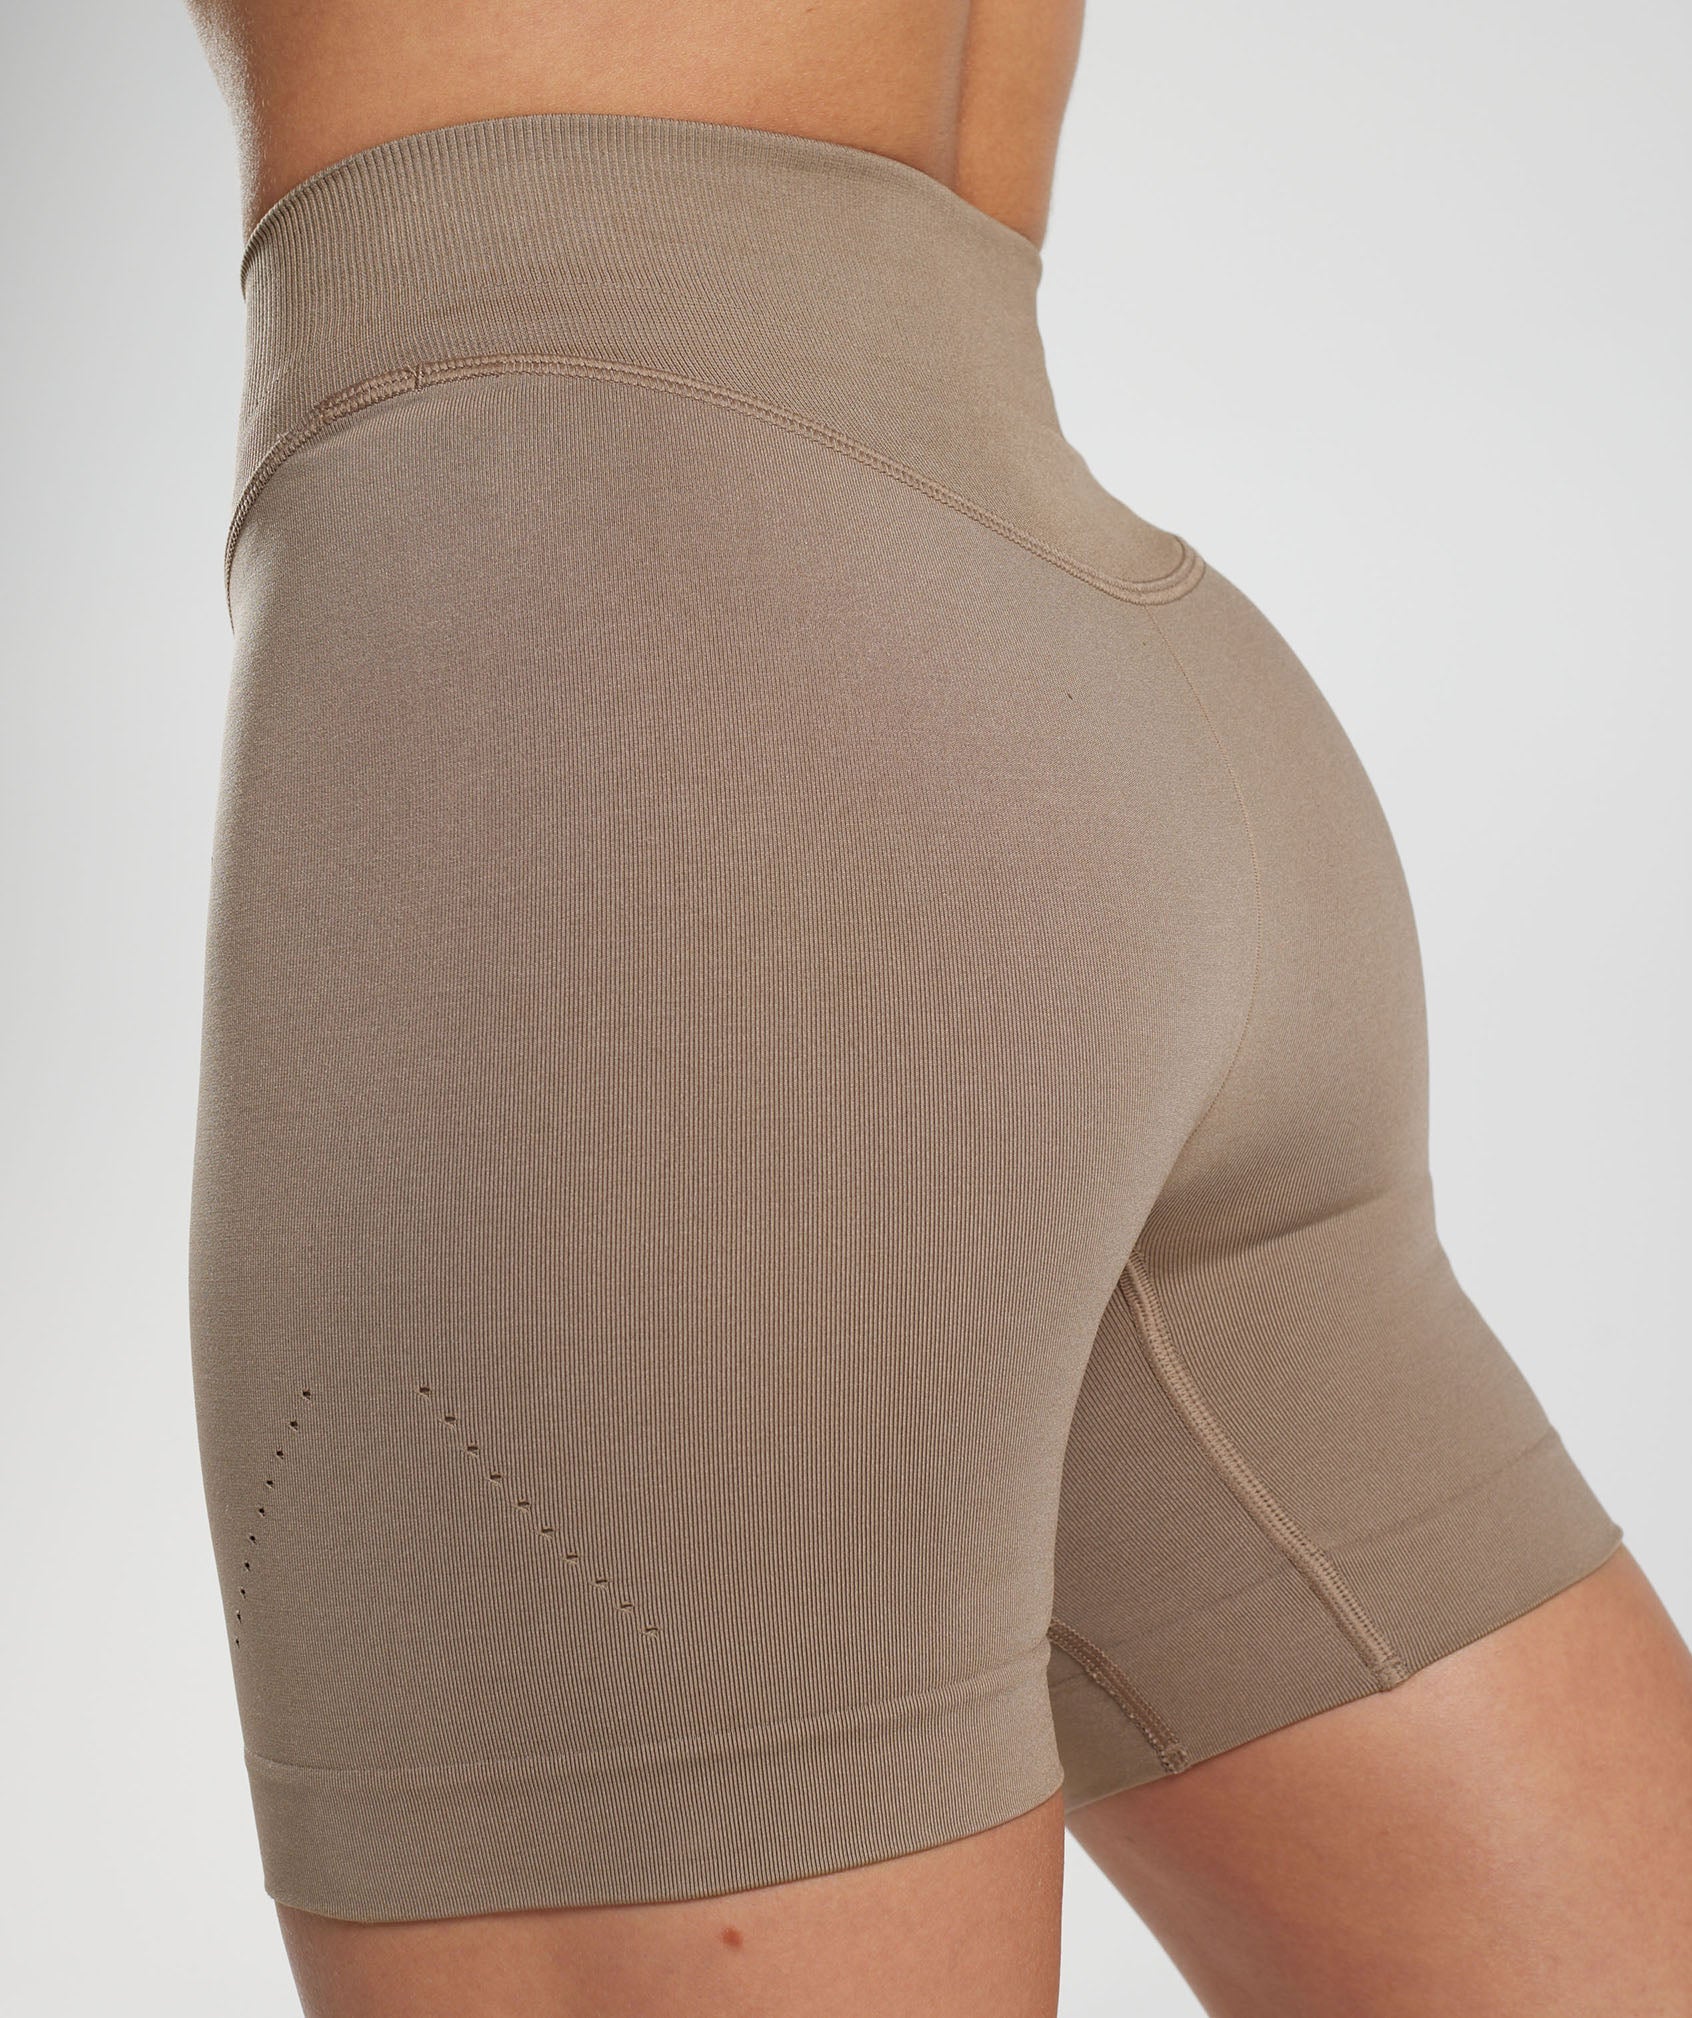 Sweat Seamless Shorts in Fossil Brown - view 6